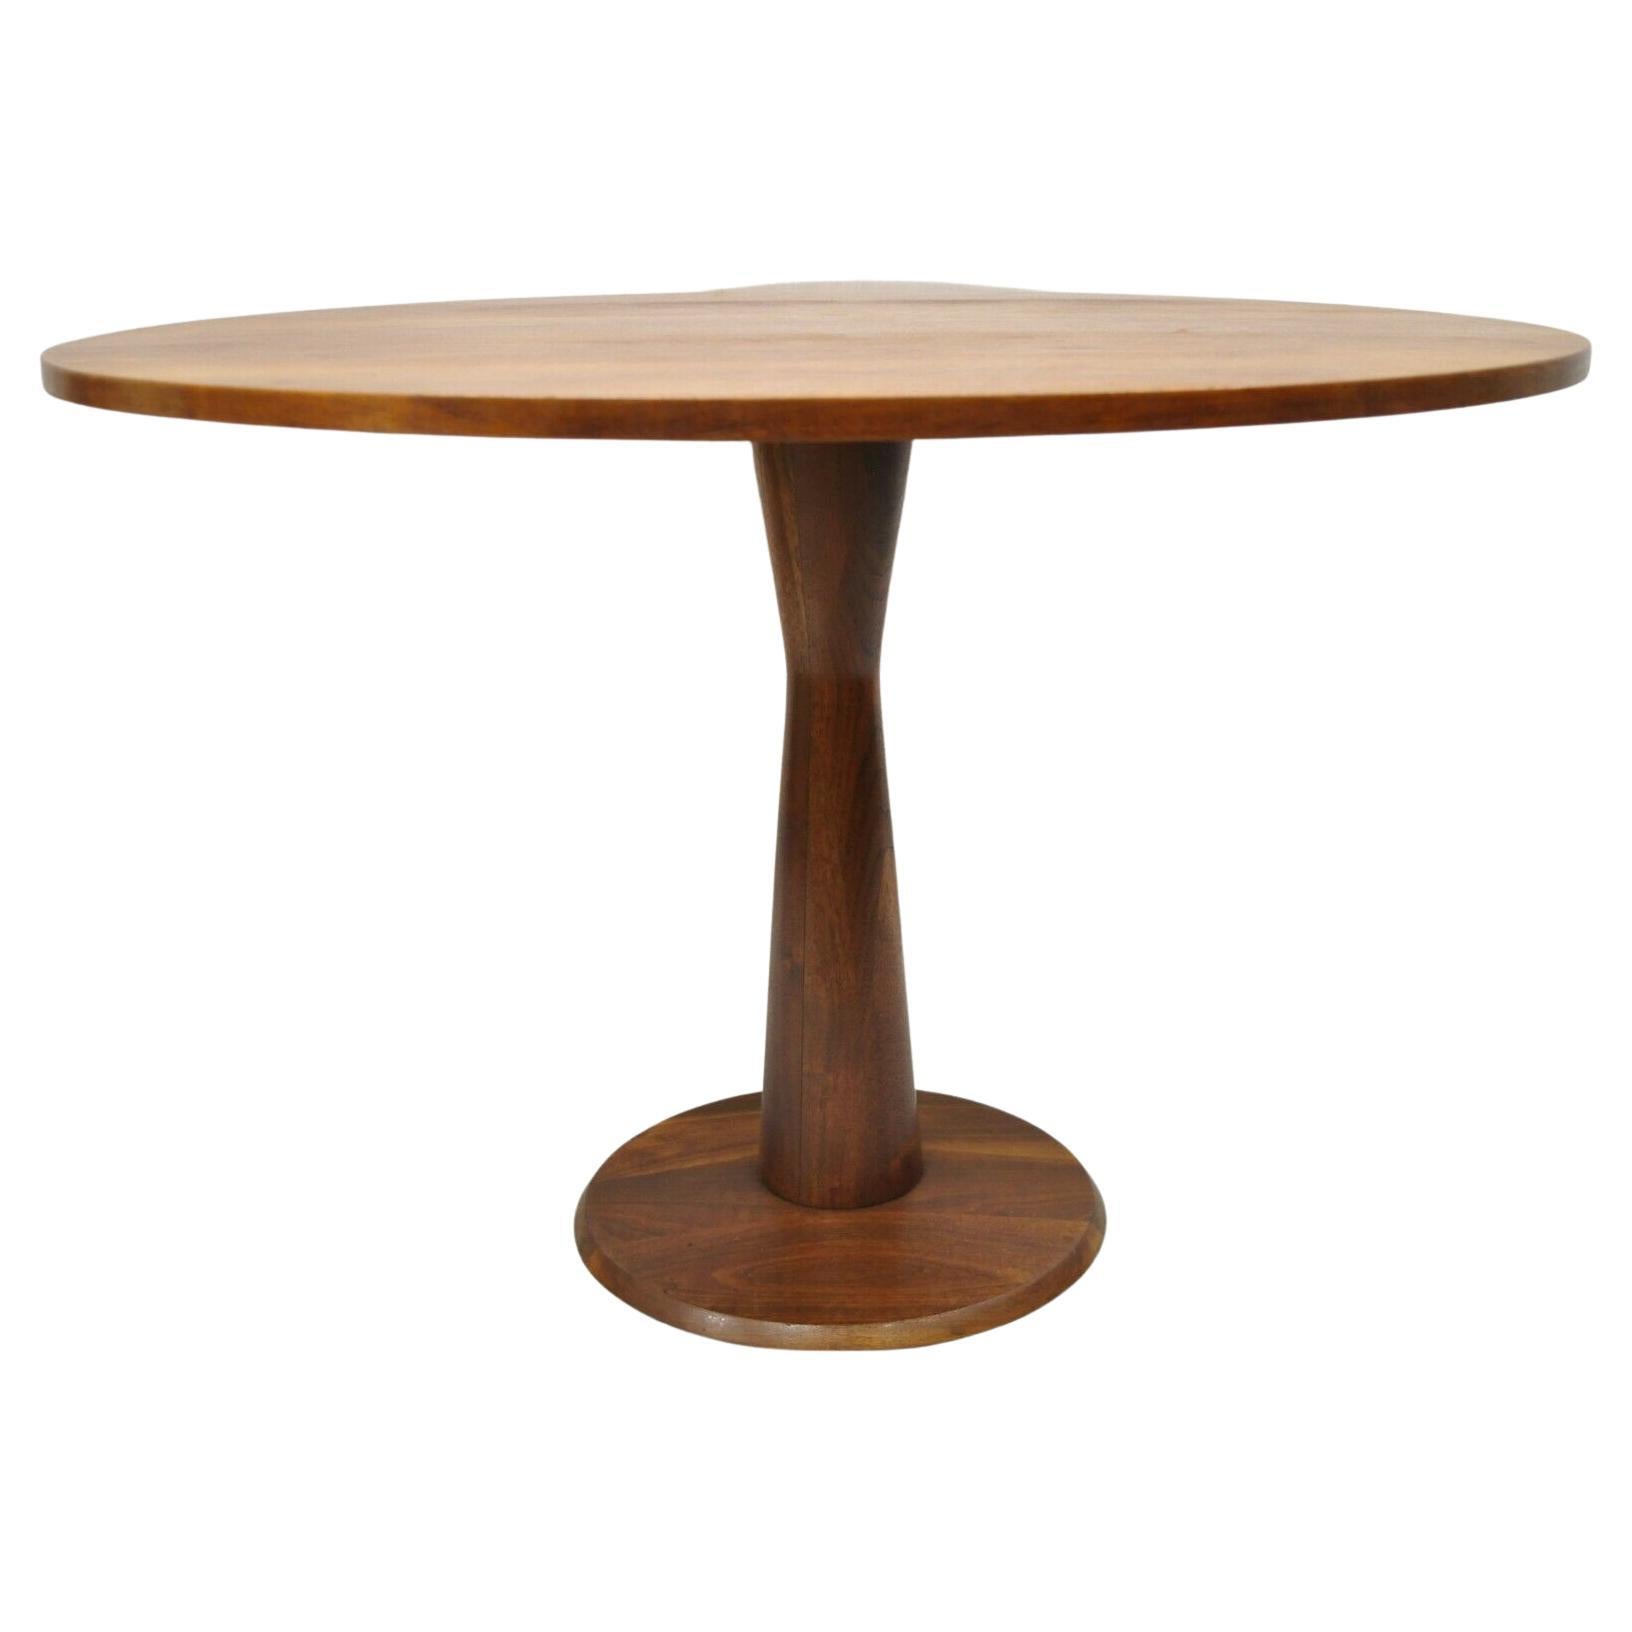 Mid-Century Modern Walnut Round Dining Table With Hourglass Pedestal Base